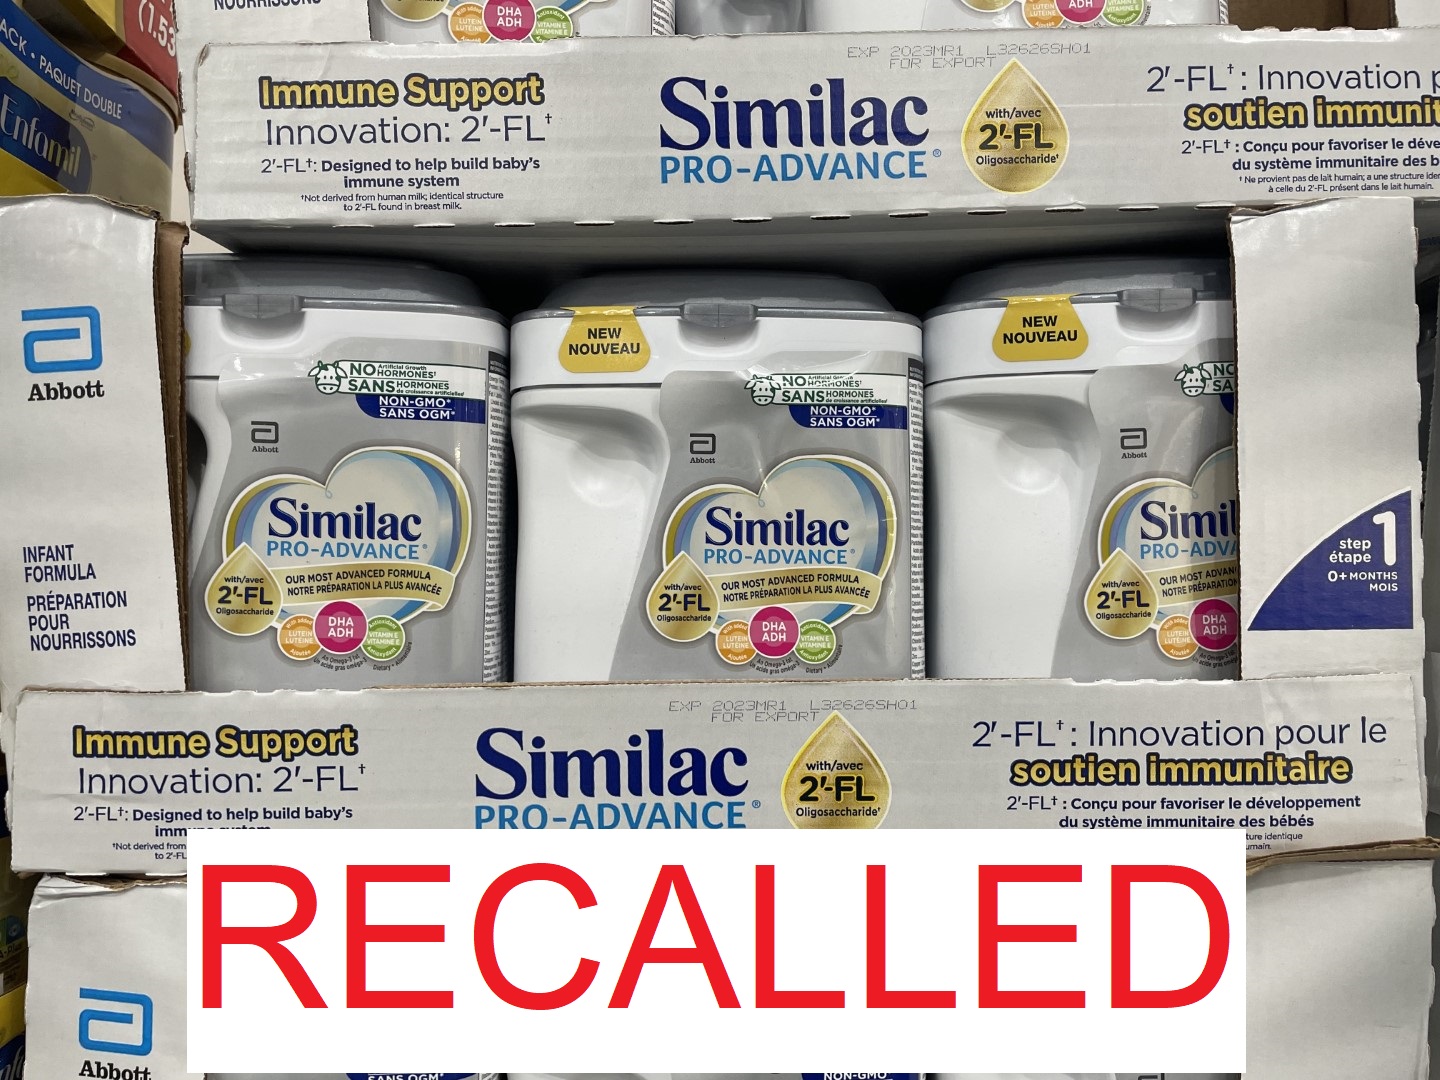 RECALL NOTICE SIMILAC infant formula products recalled due to